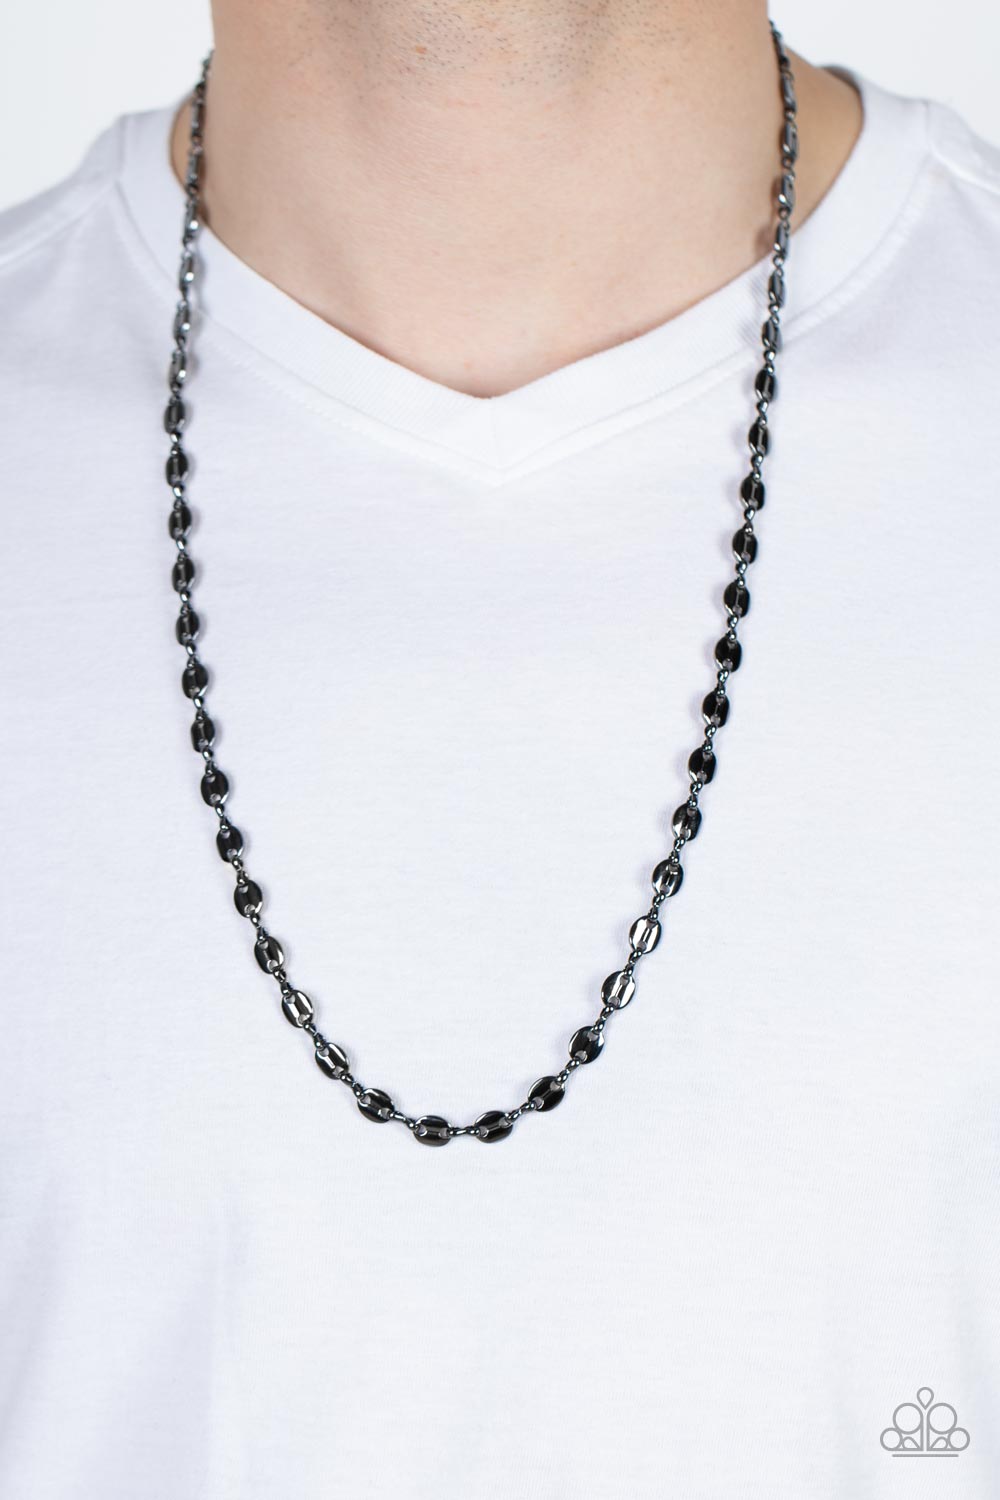 Paparazzi ♥ Come Out Swinging - Black ♥  Mens Necklace